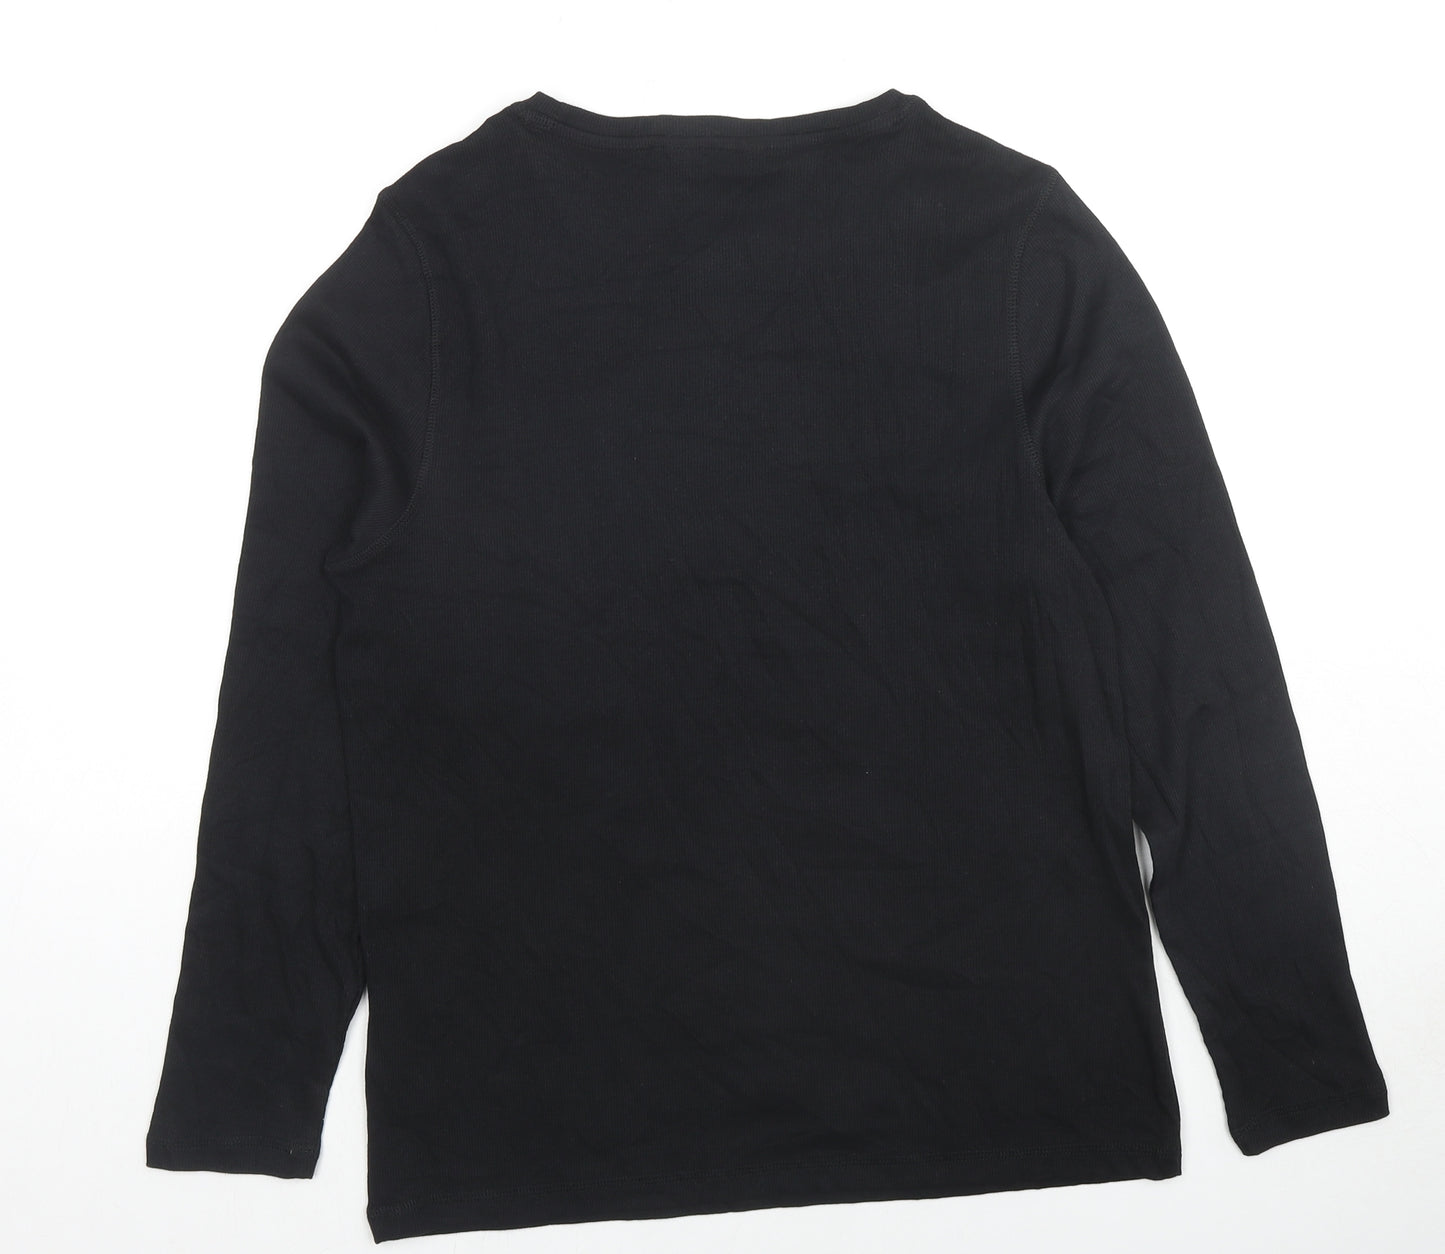 Marks and Spencer Womens Black Round Neck Cotton Pullover Jumper Size 18